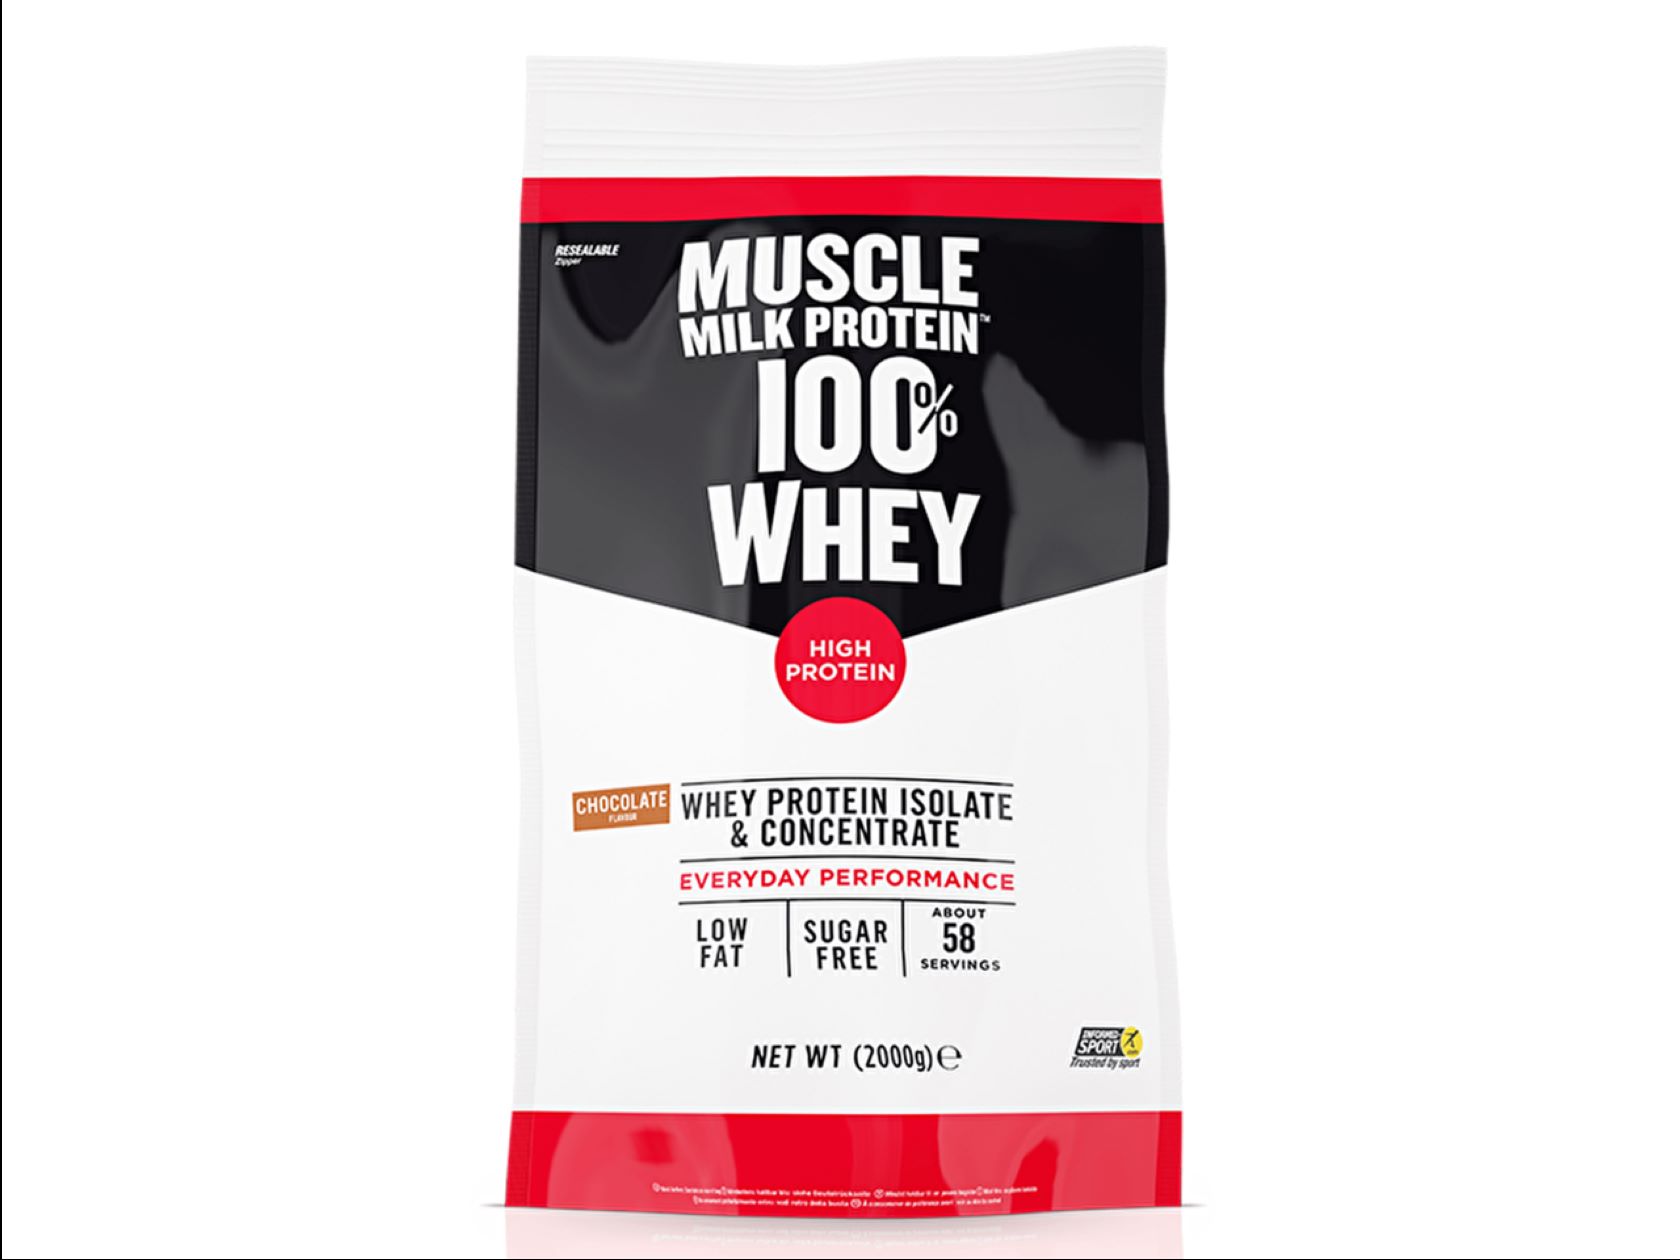 10-cytosport-100-whey-protein-nutrition-facts